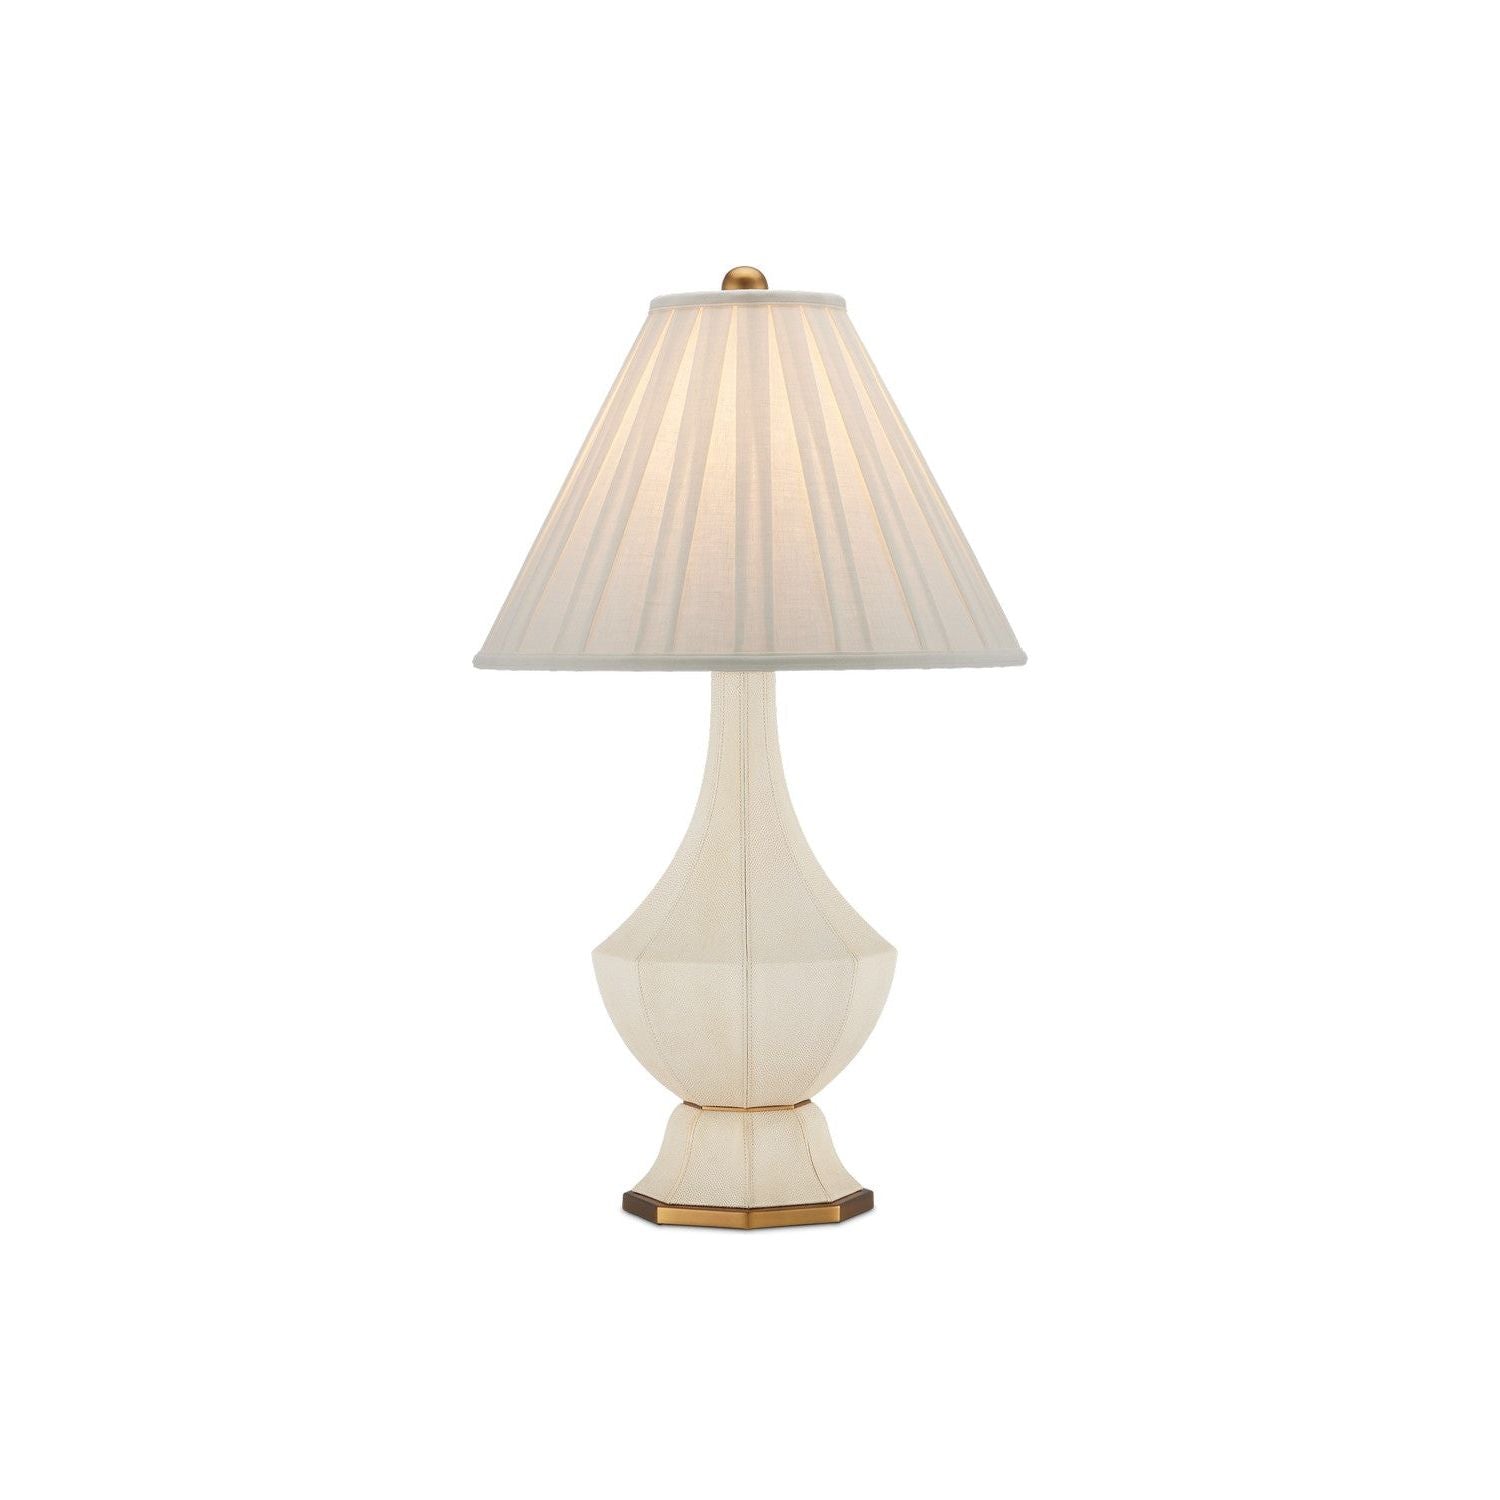 Currey and Company - 6000-0926 - One Light Table Lamp - Beige/Antique Brass